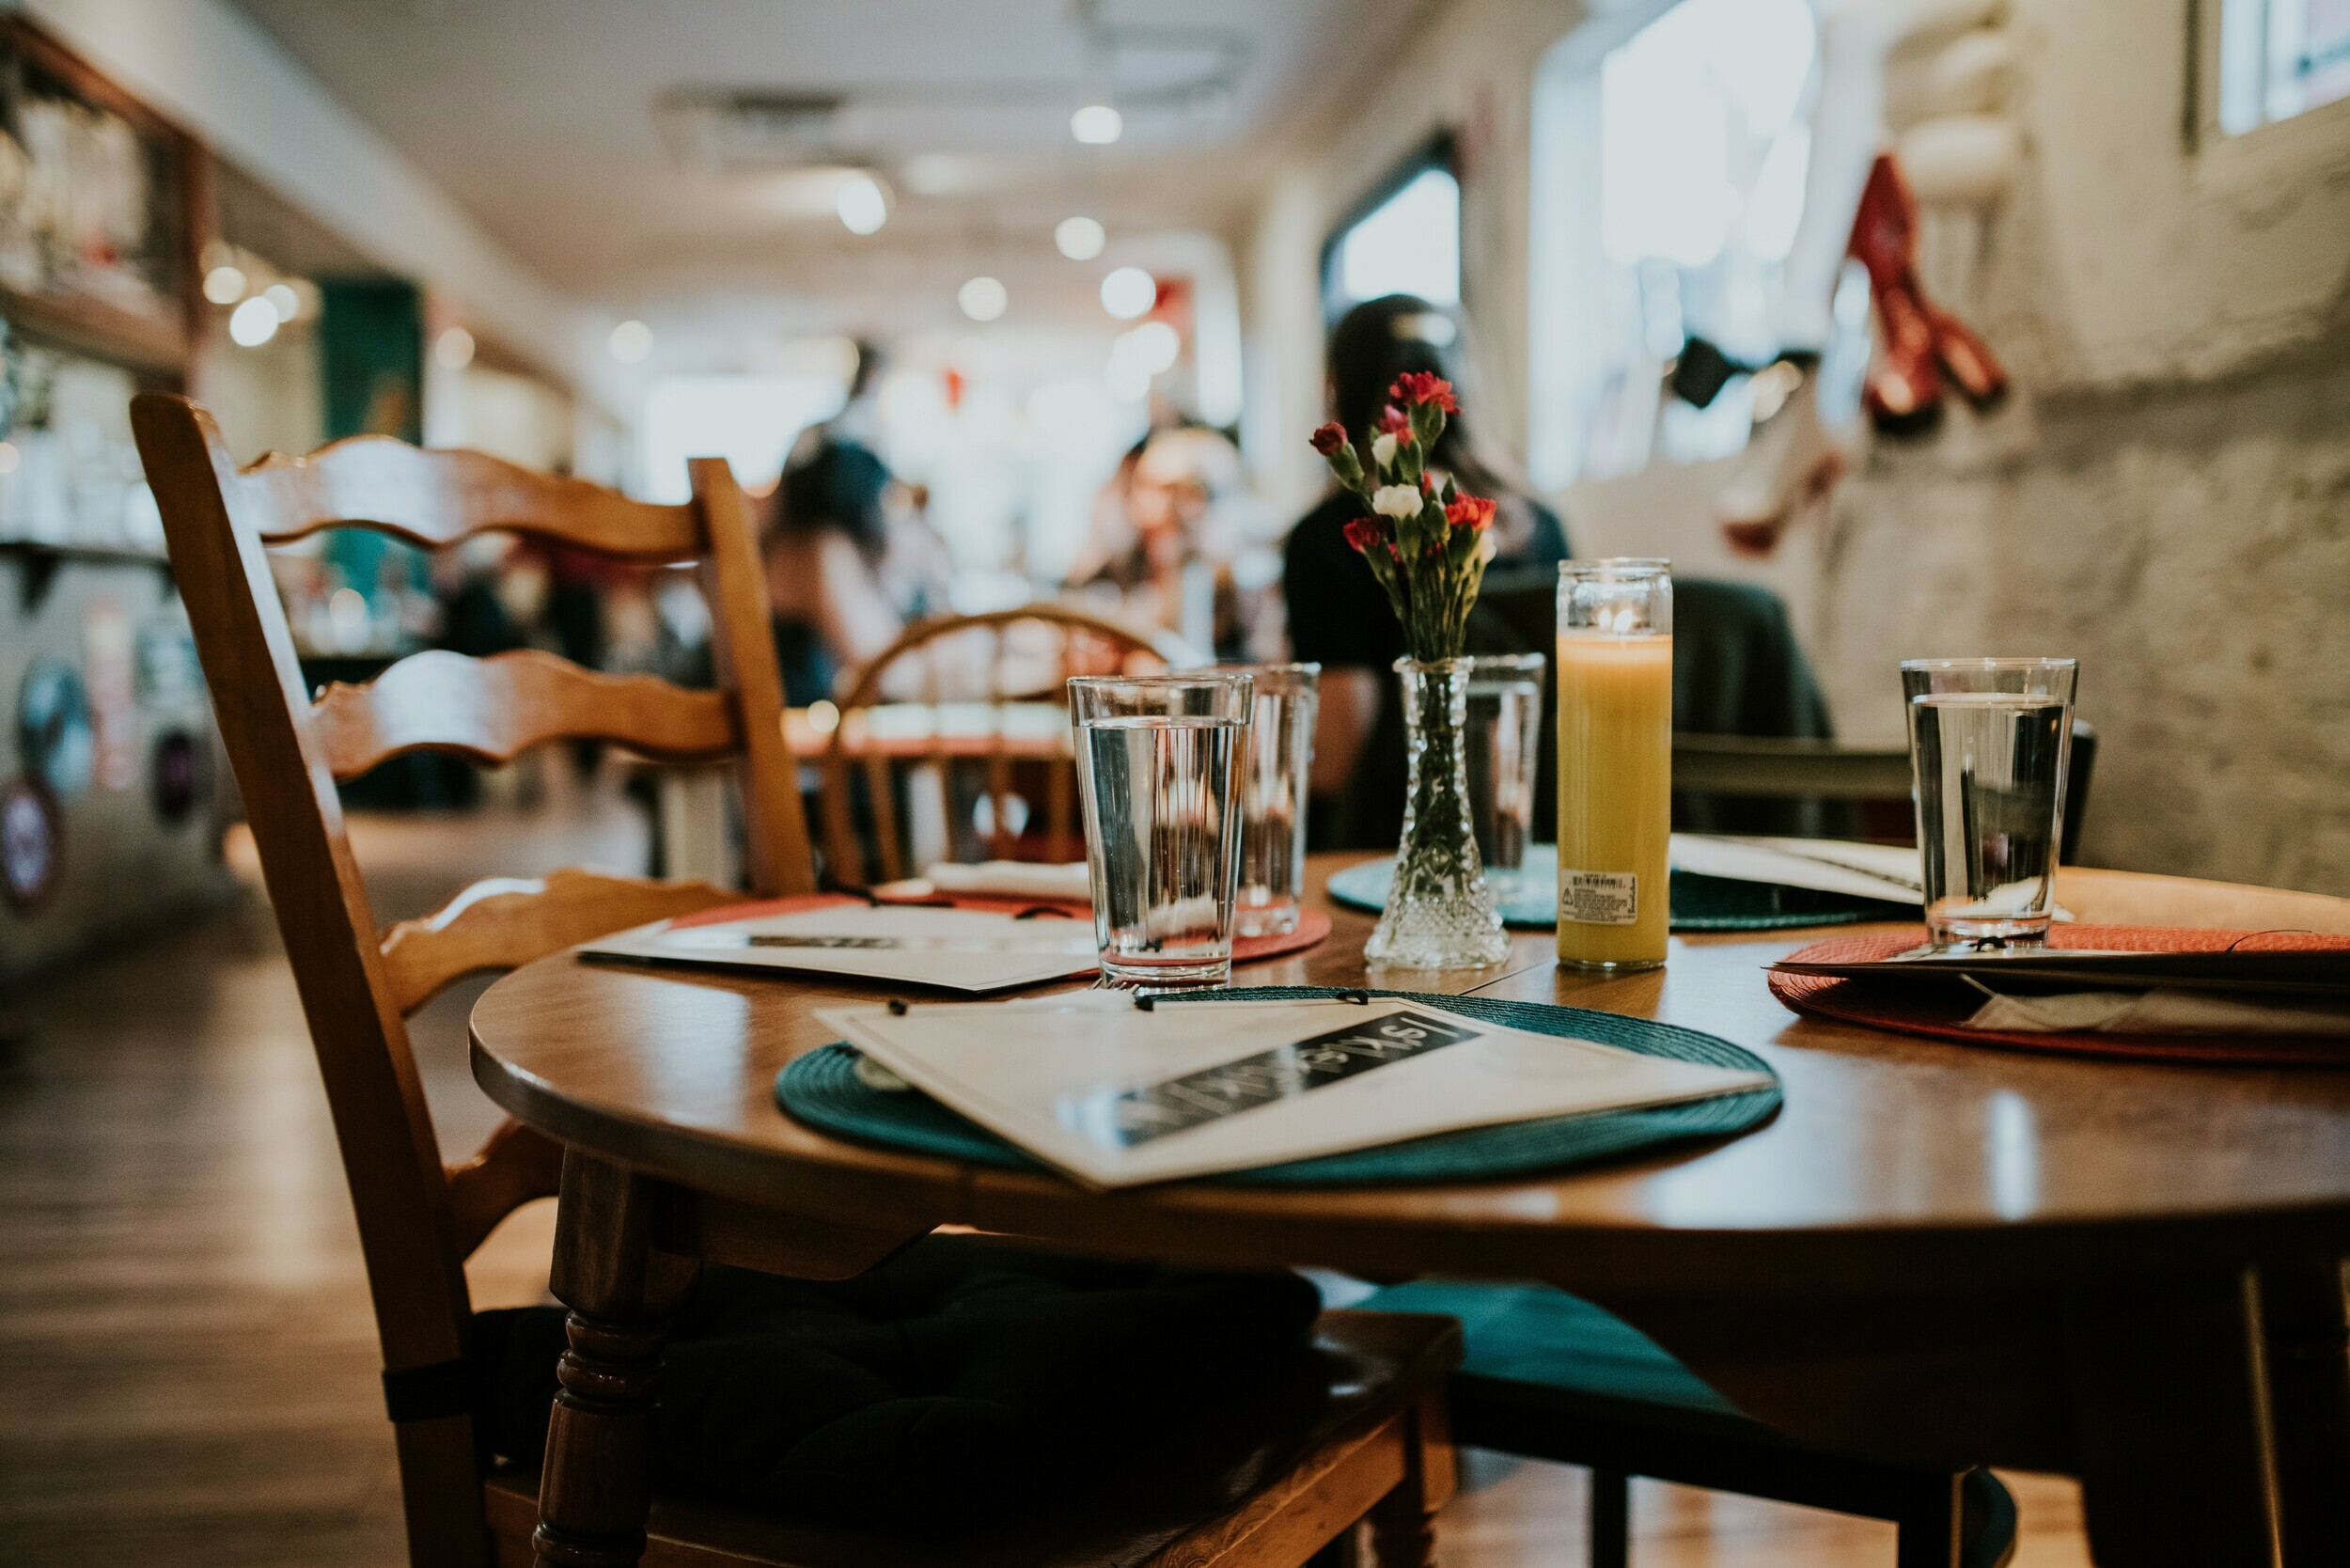 What the 182 days of lockdown cost the restaurant business